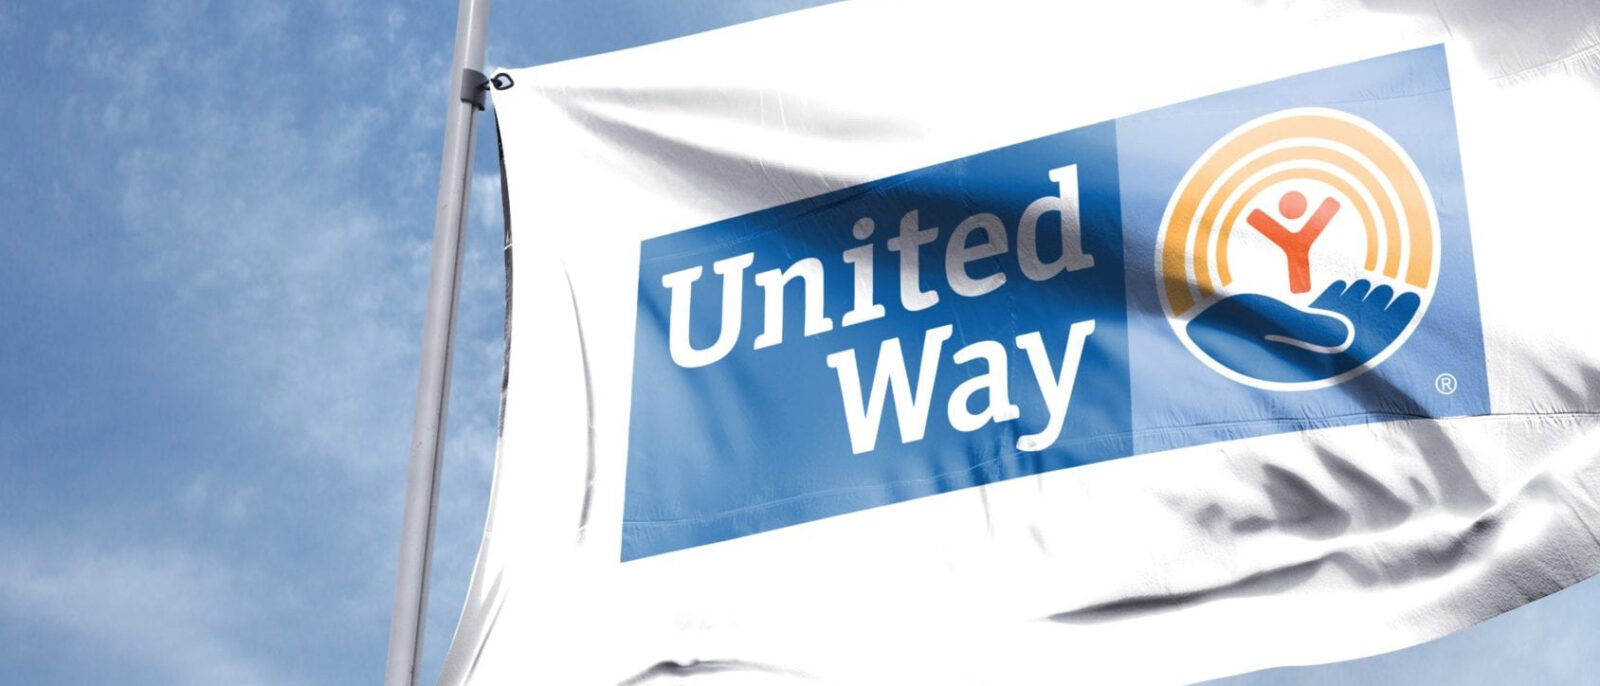 Corporate faculty member joins United Way Executive Board